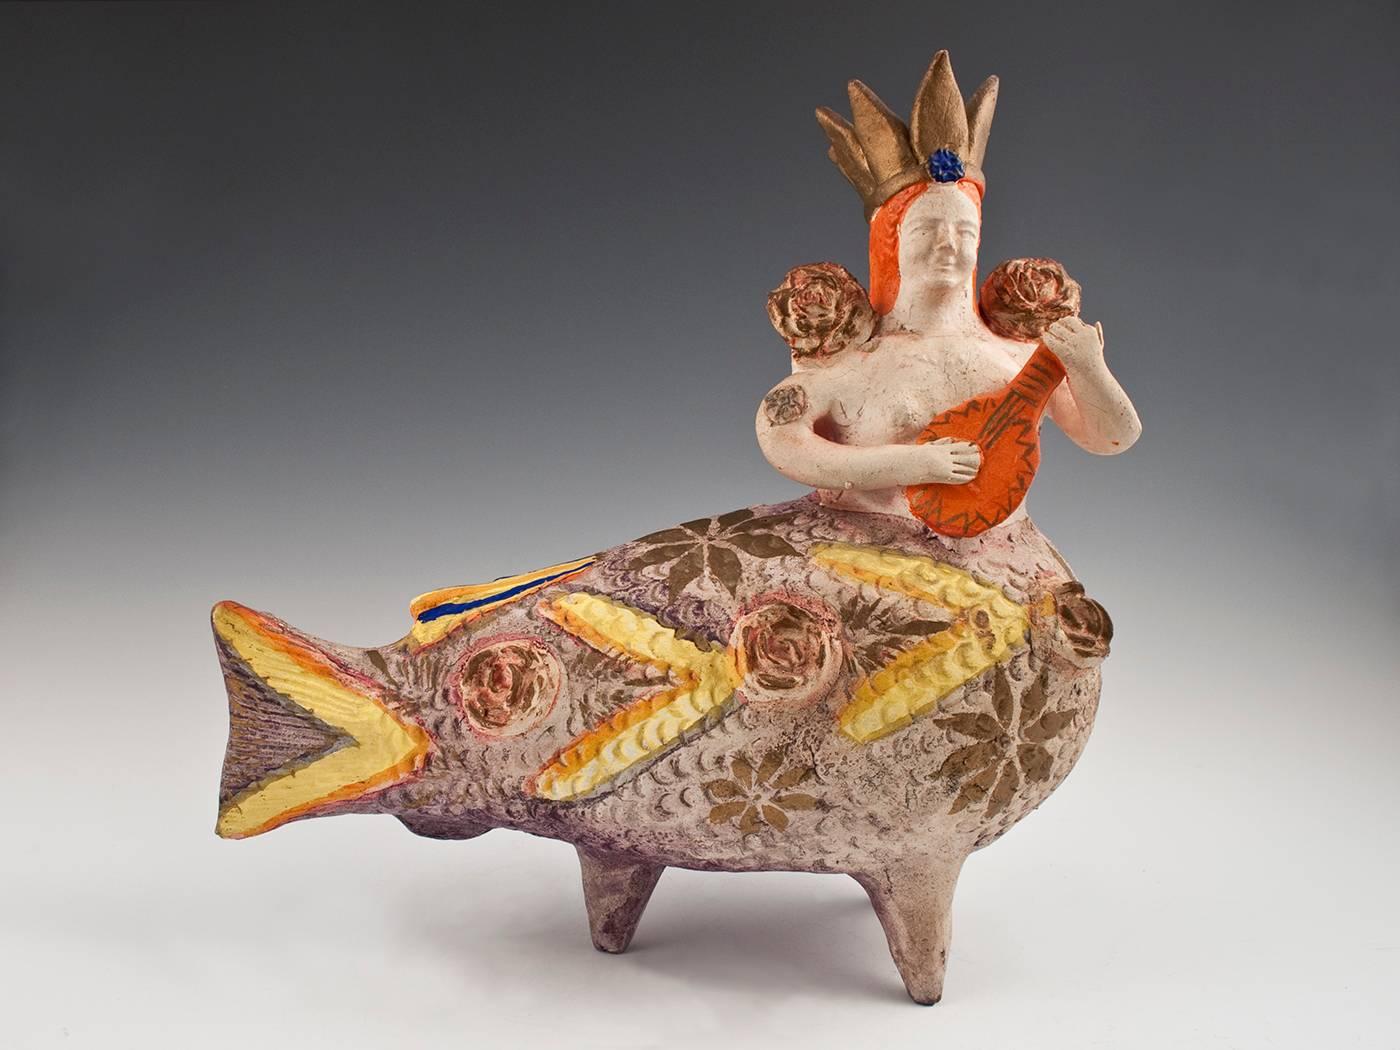 Offered by Zena Kruzick
Mid-20th century ceramic mermaid Folk Art sculpture, Mexico

Earthenware, slip decoration, glaze 
Ex. Fred and Nancy Roscoe collection, California, collected in the 1950s.
    